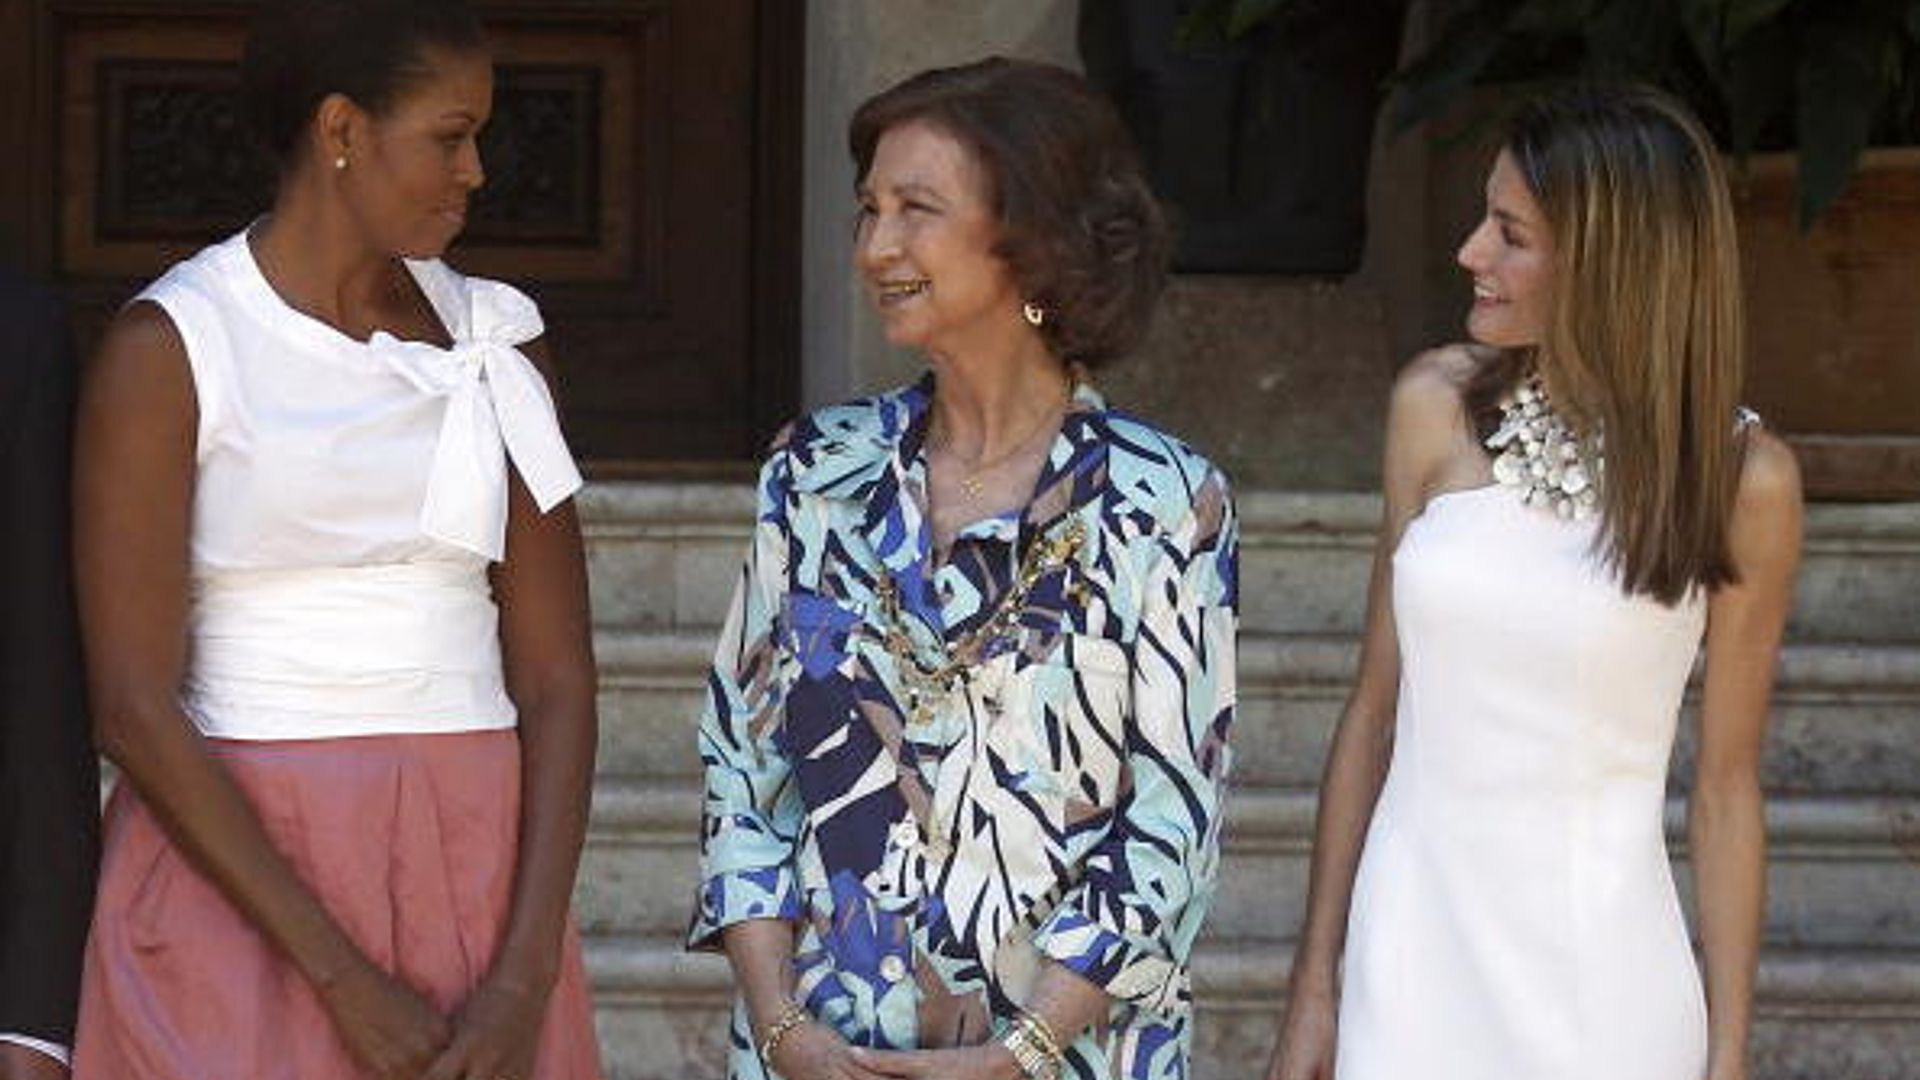 Spain's Queen Letizia to celebrate her birthday at the White House